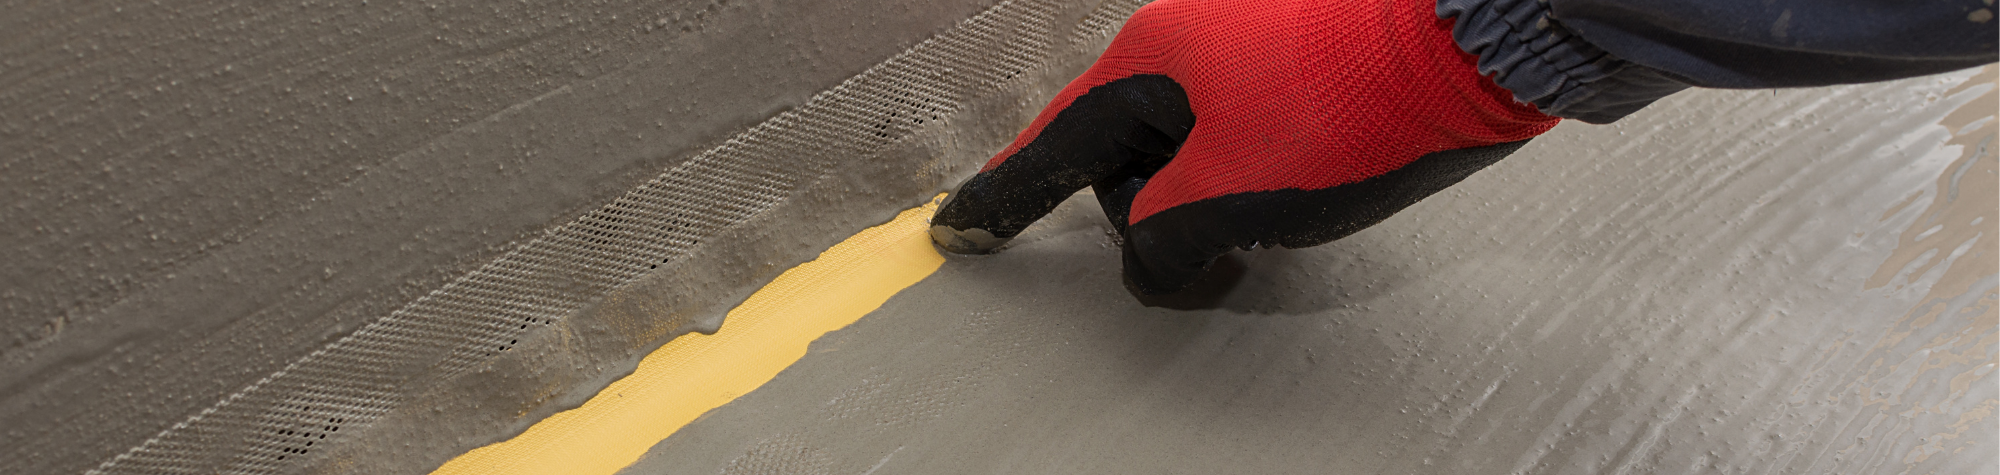 What is Basement Waterproofing & what are its benefits?